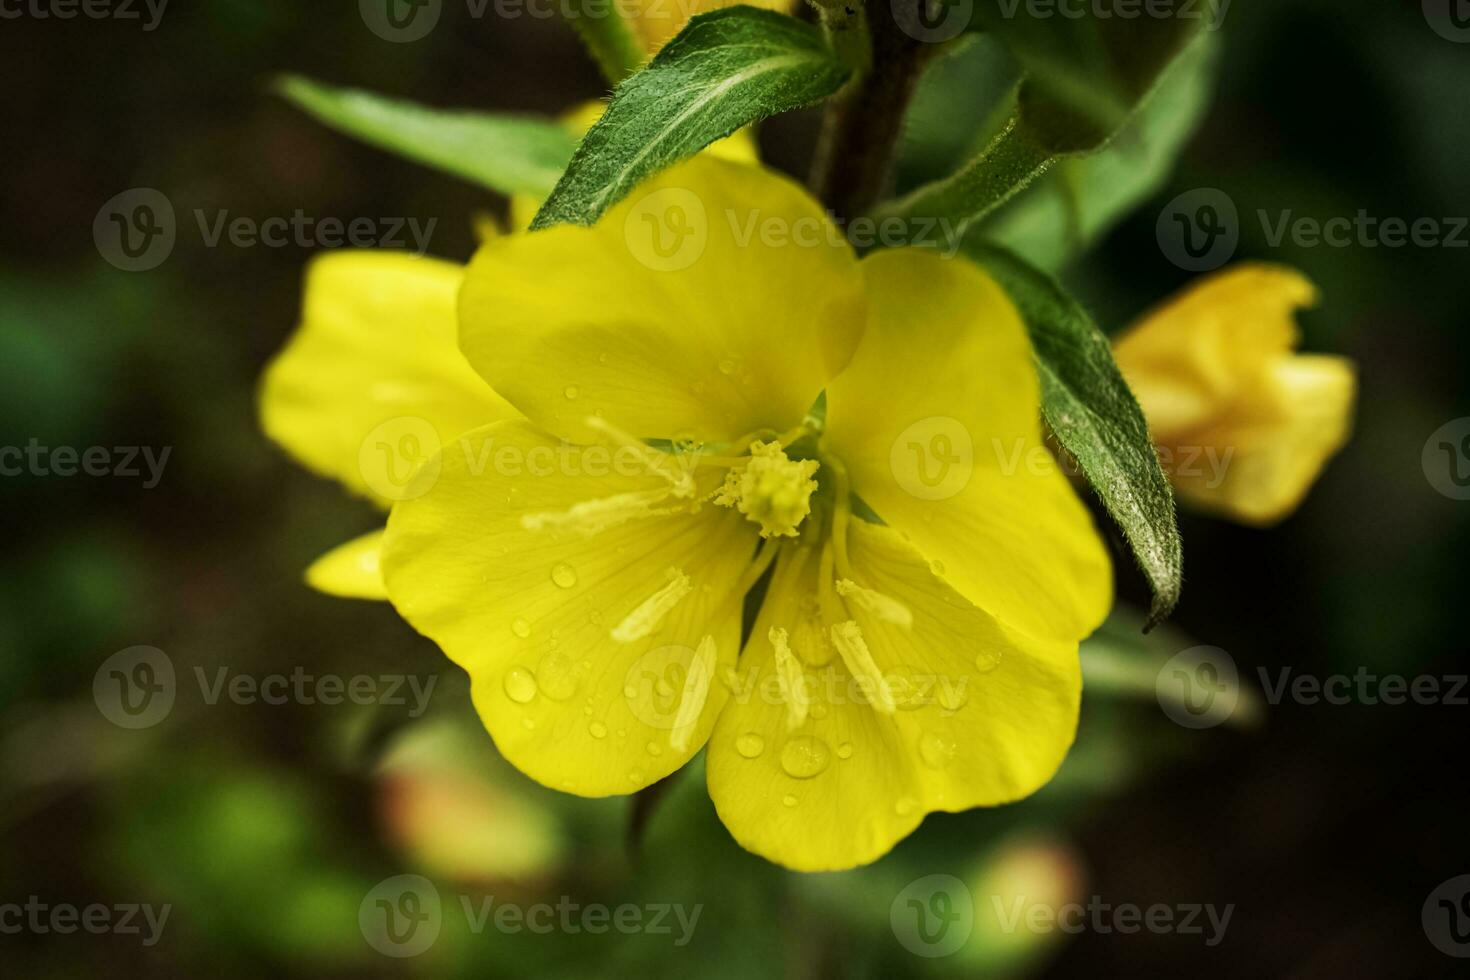 Yellow Evening Primrose flowers and green leaves on dark blurry background top down plant view photo